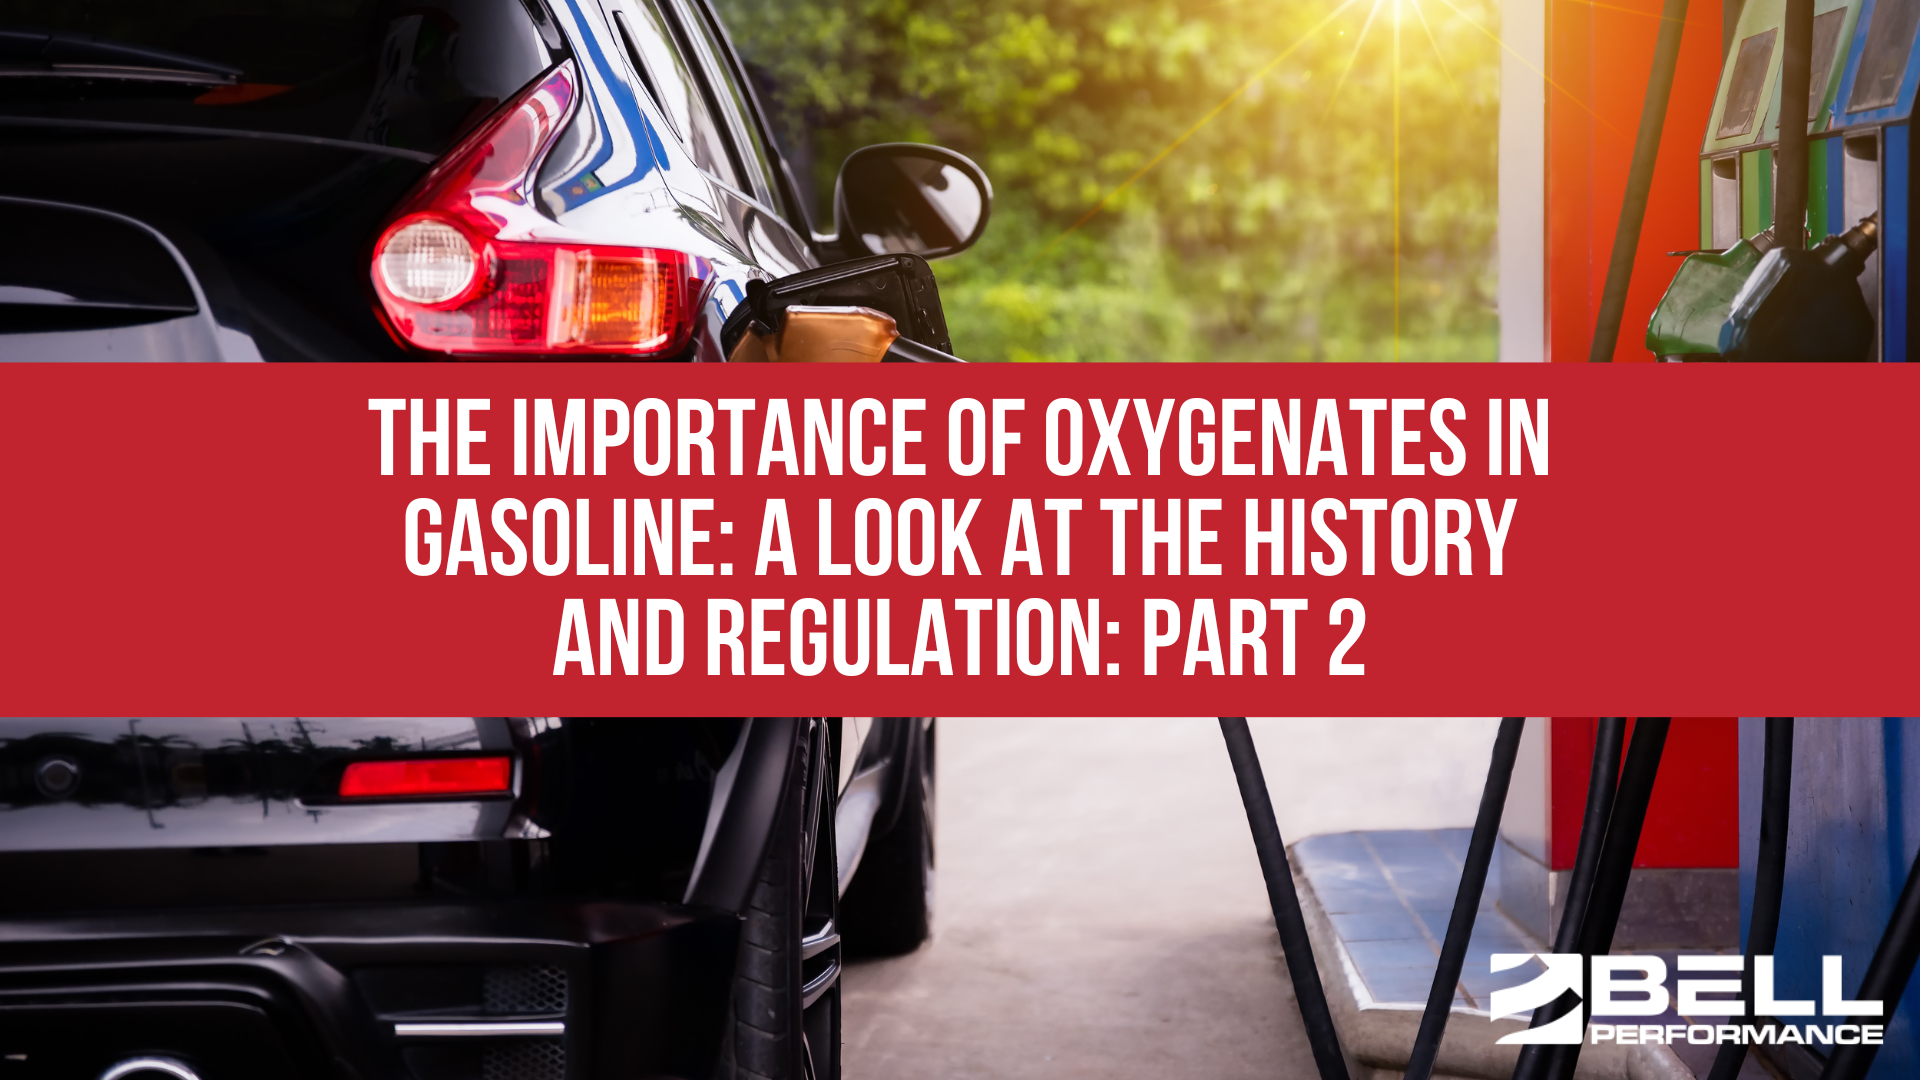 The Importance of Oxygenates in Gasoline: A Look at the History and Regulation - Part 2